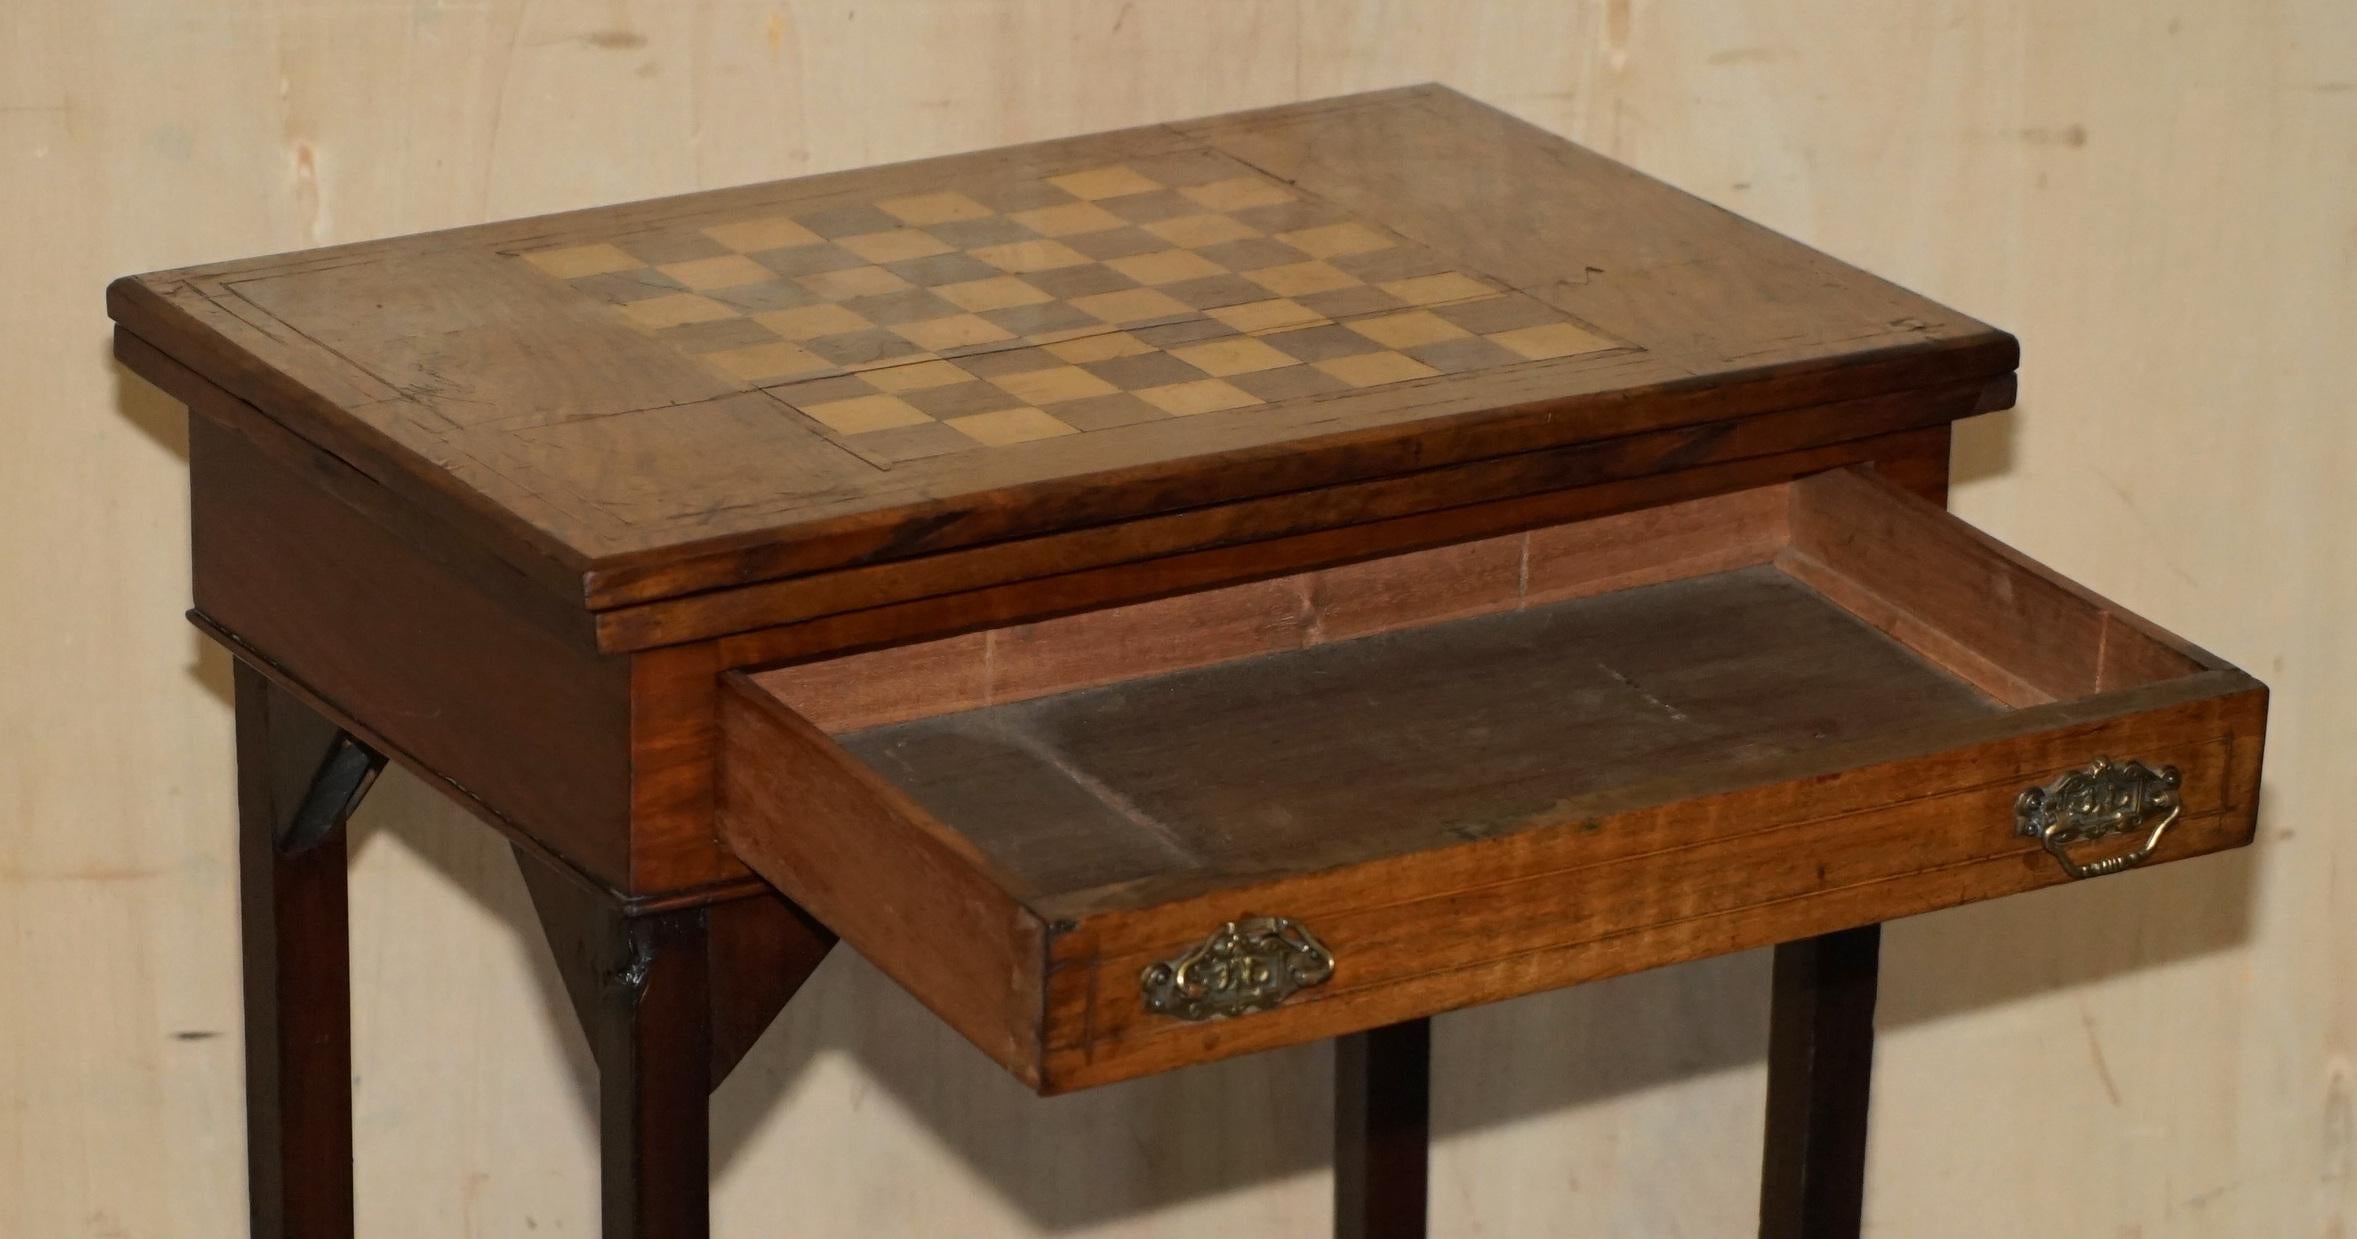 EXQUISITE WALNUT SATINWOOD & HARDWOOD ANTIQUE ViCTORIAN CHESSBOARD GAMES TABLE For Sale 6